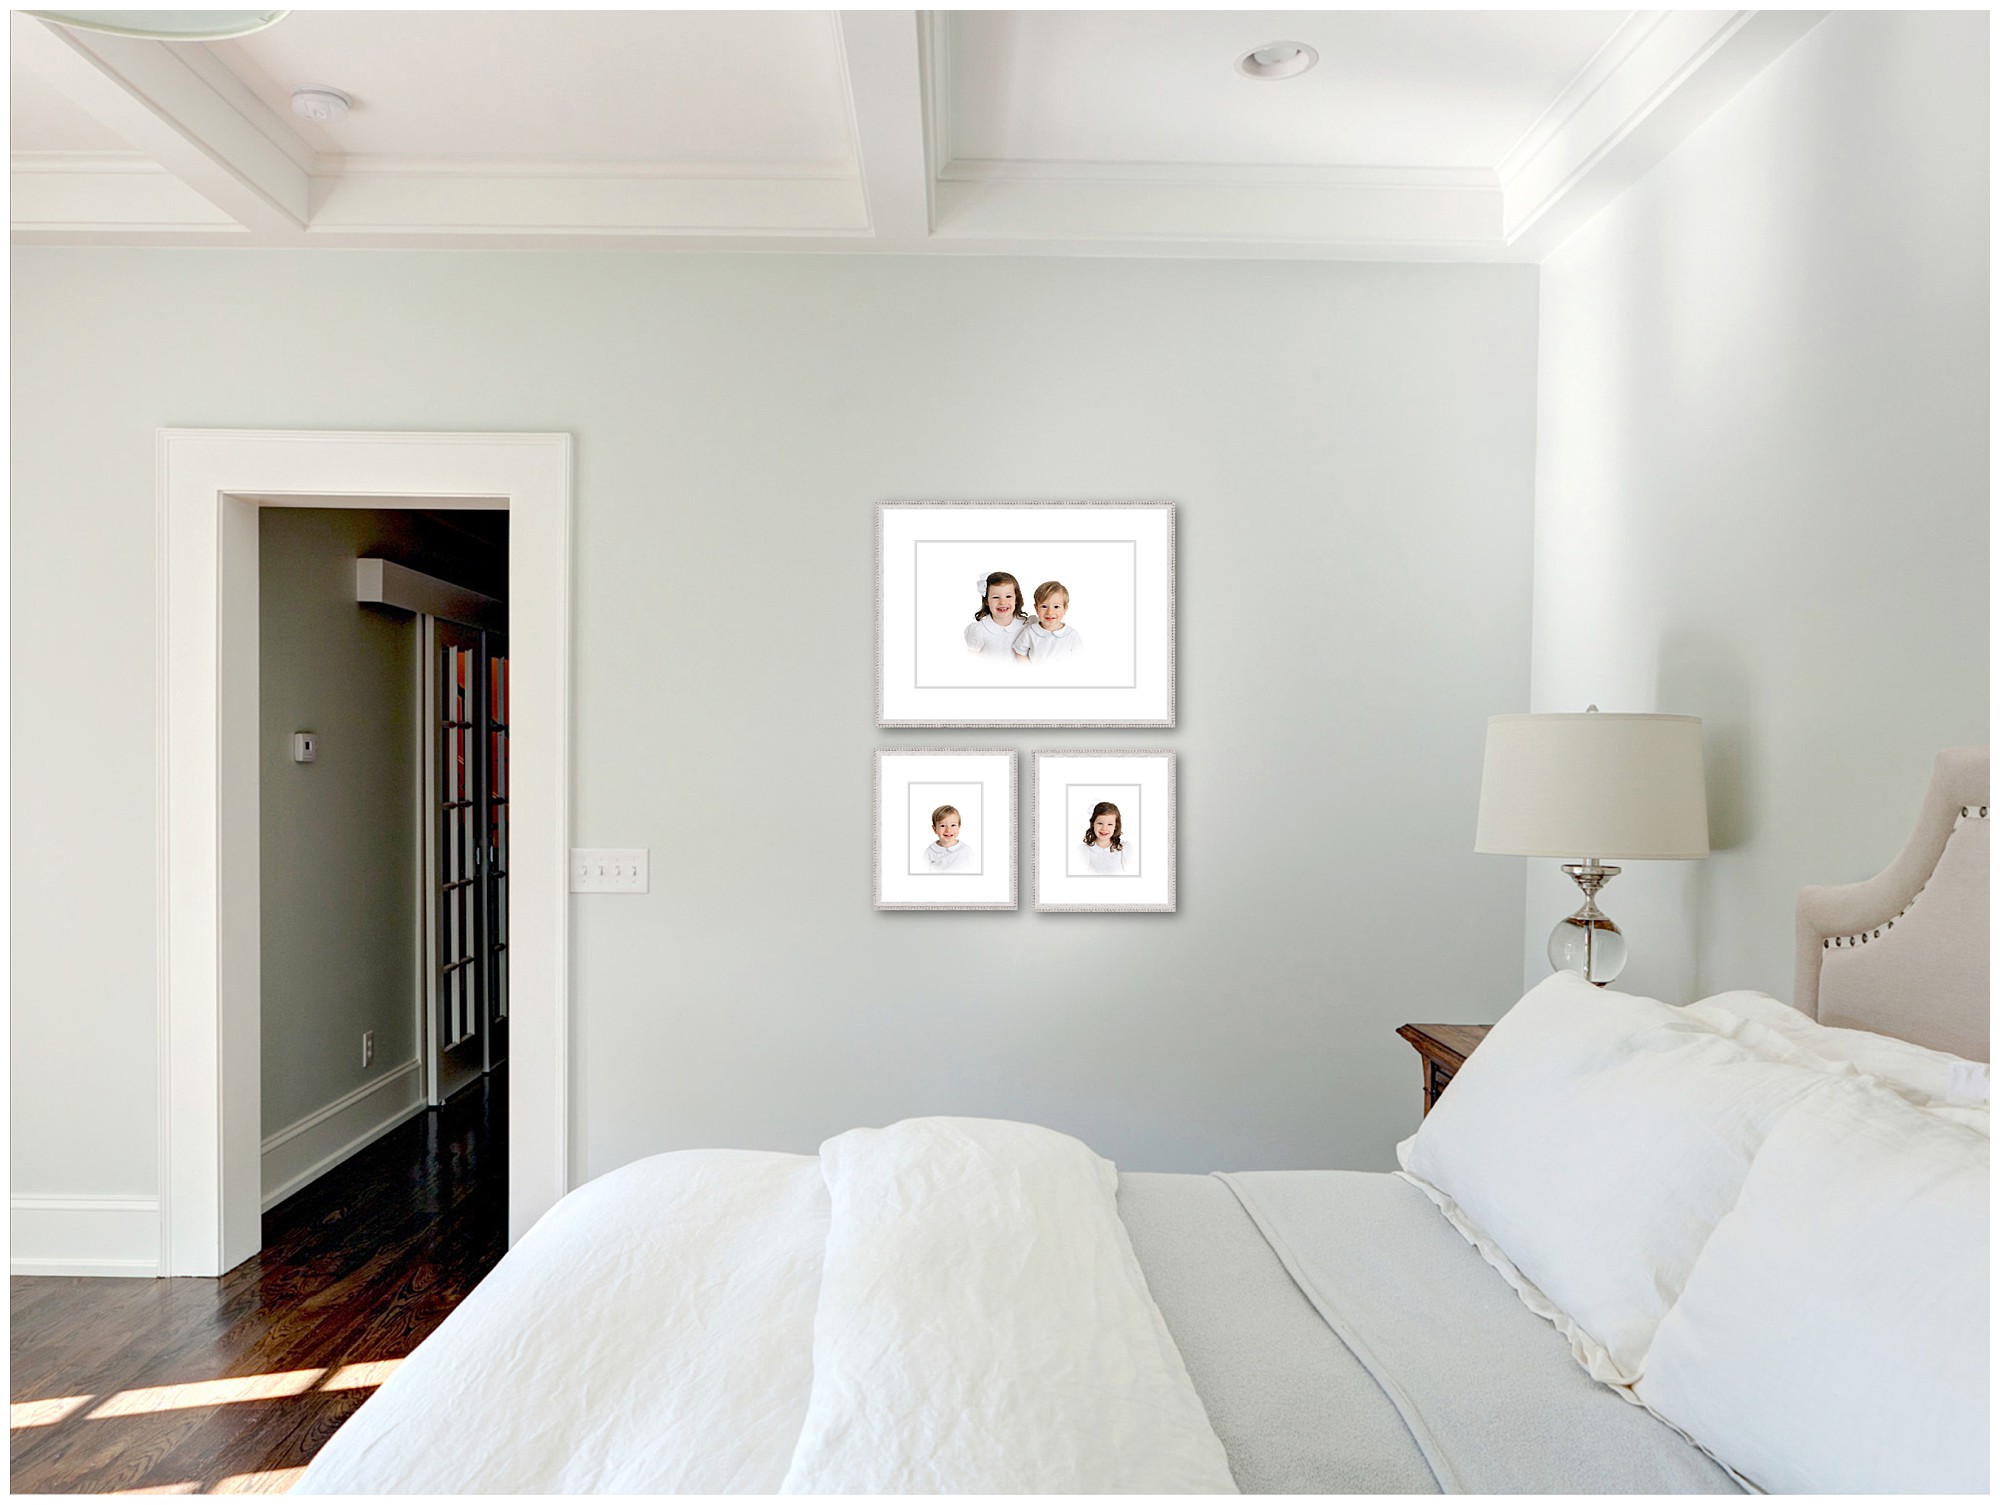 A photo of three frames hanging on the wall too show what Atlanta heirloom portraits will look like framed in a group.